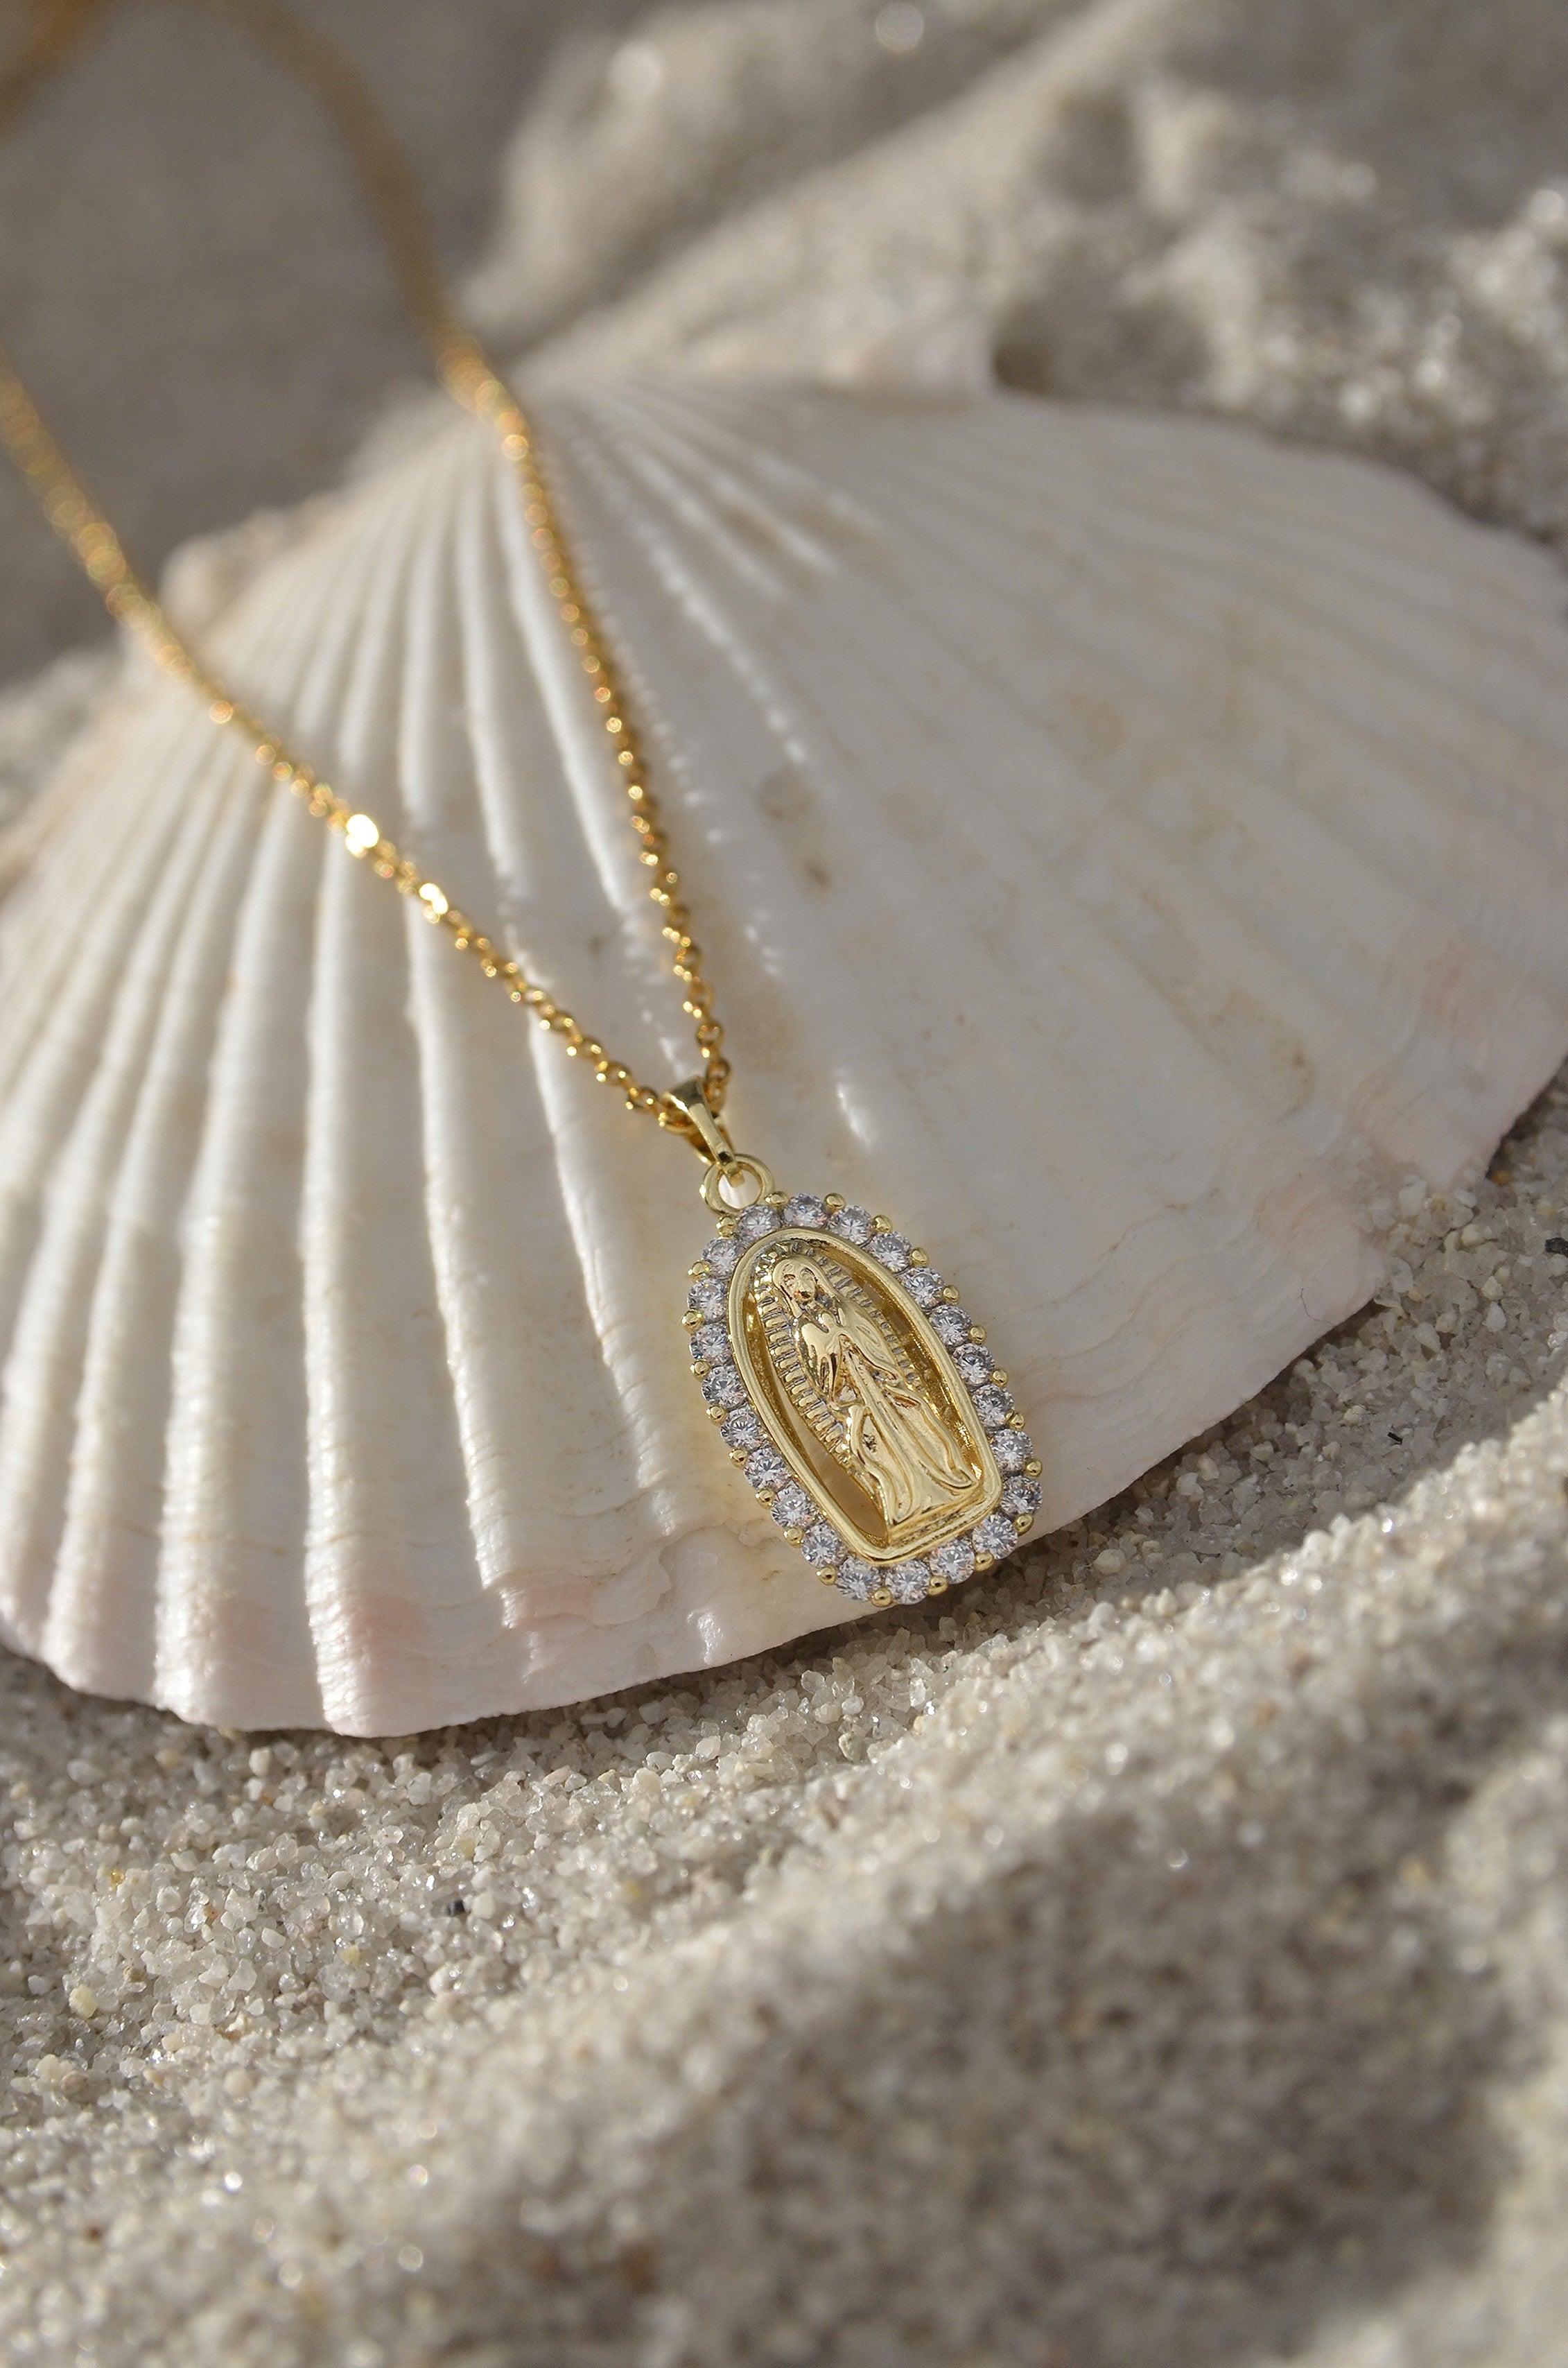 Buy 18k Gold Virgin Mary Charm / Pendant Online | Arnold Jewelers